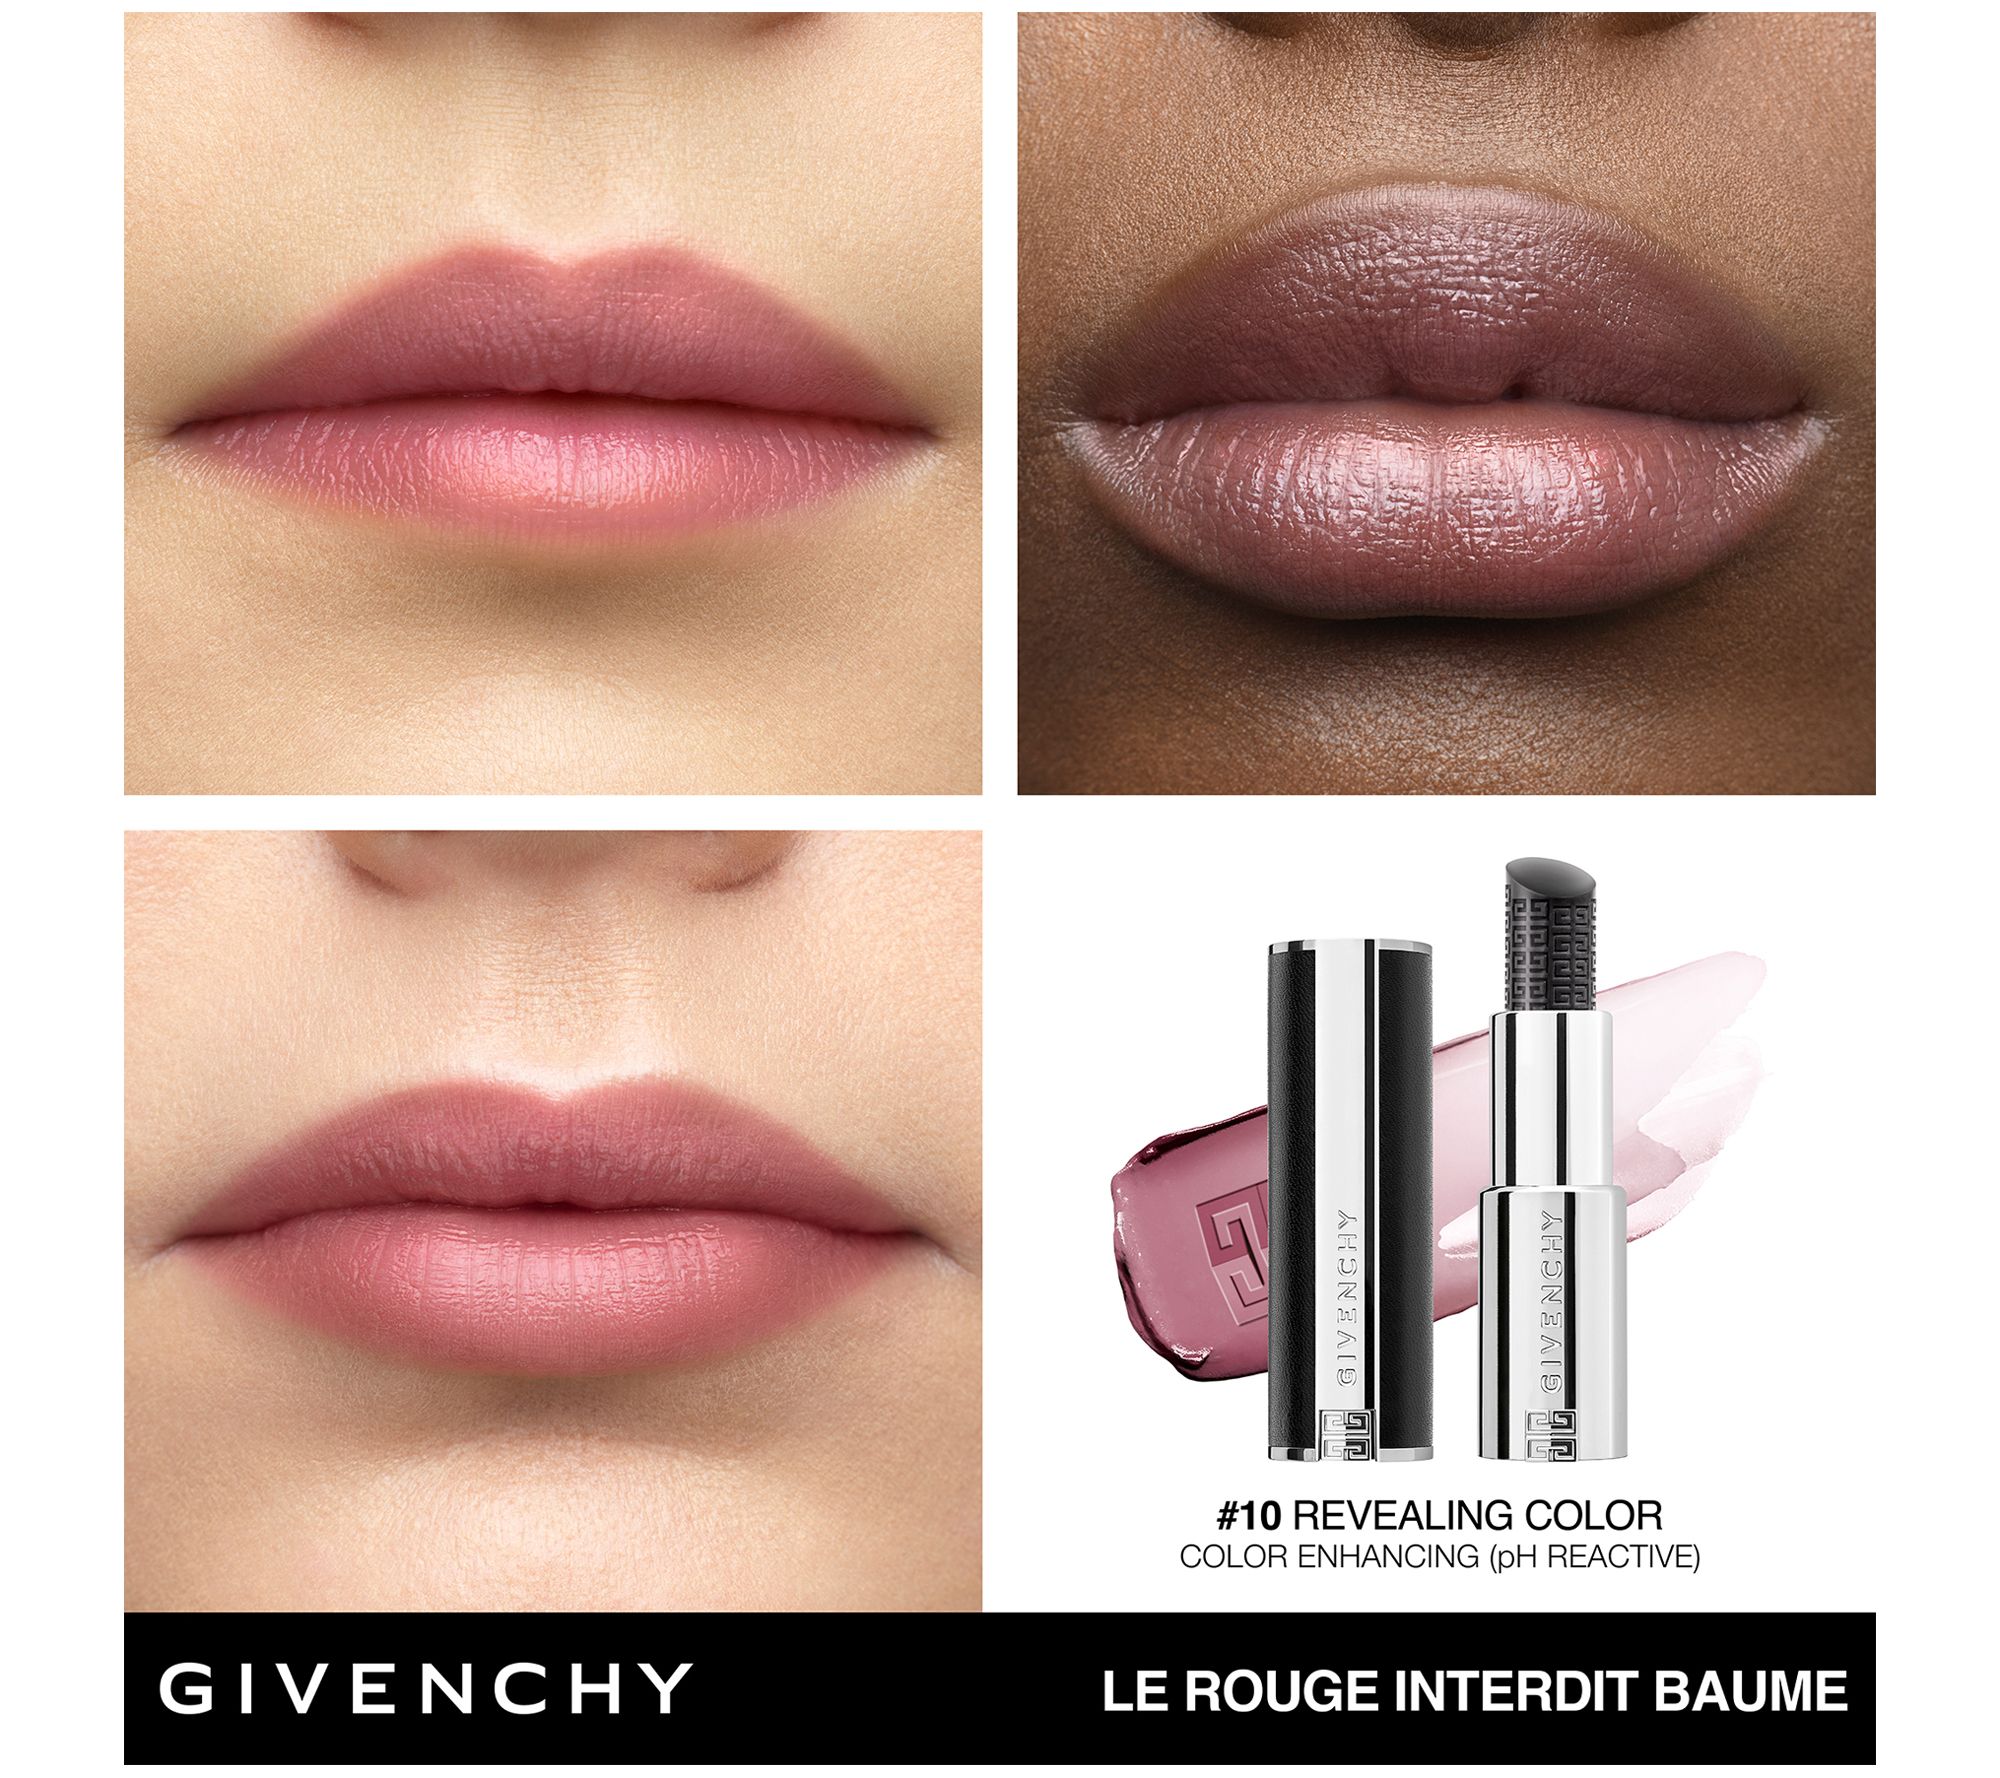 Givenchy Rouge Sheer Velvet Special Edition Nude Lipstick 